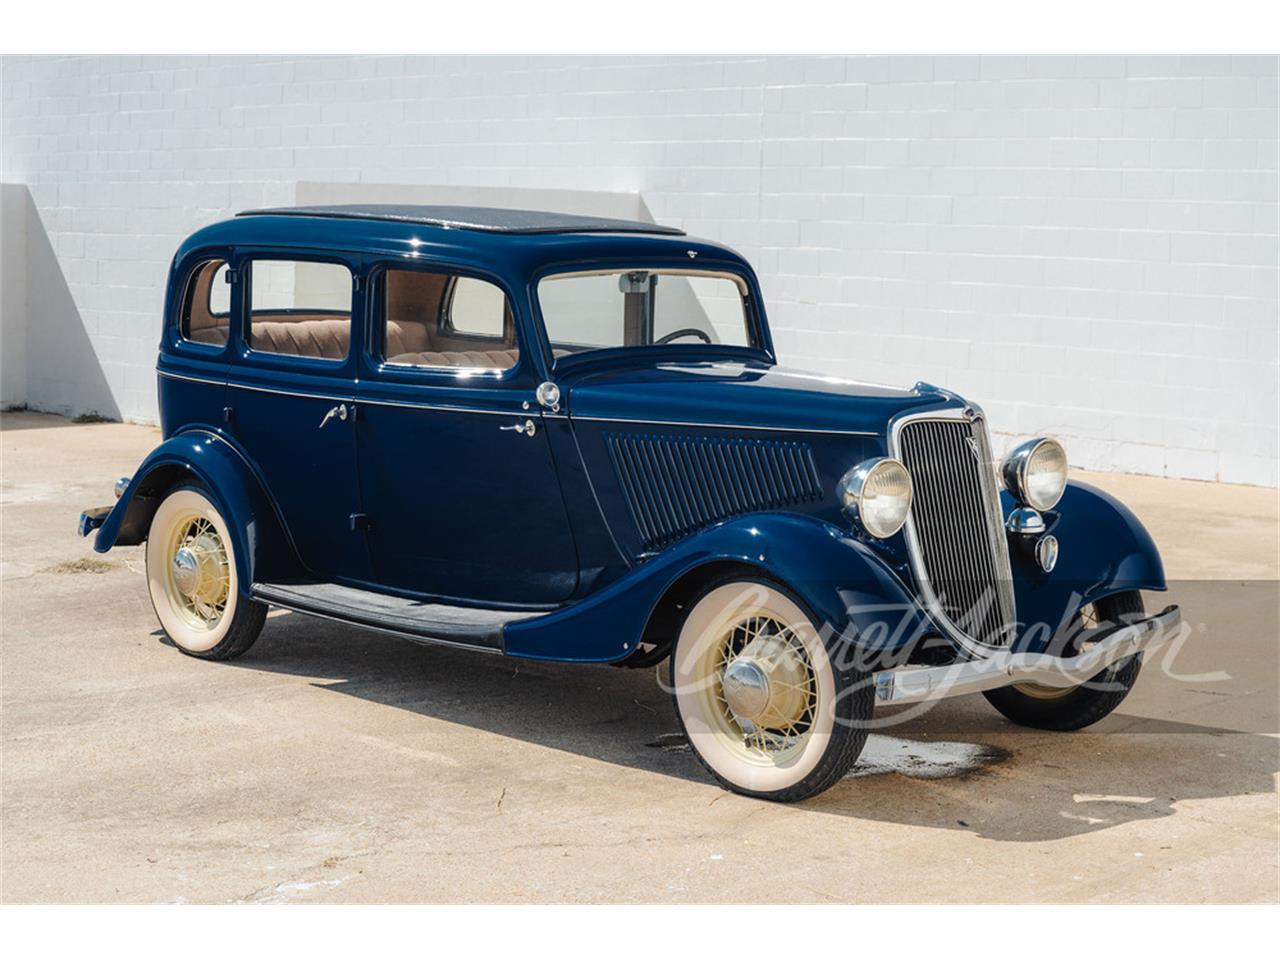 For Sale at Auction: 1934 Ford Deluxe in Scottsdale, Arizona for sale in Scottsdale, AZ